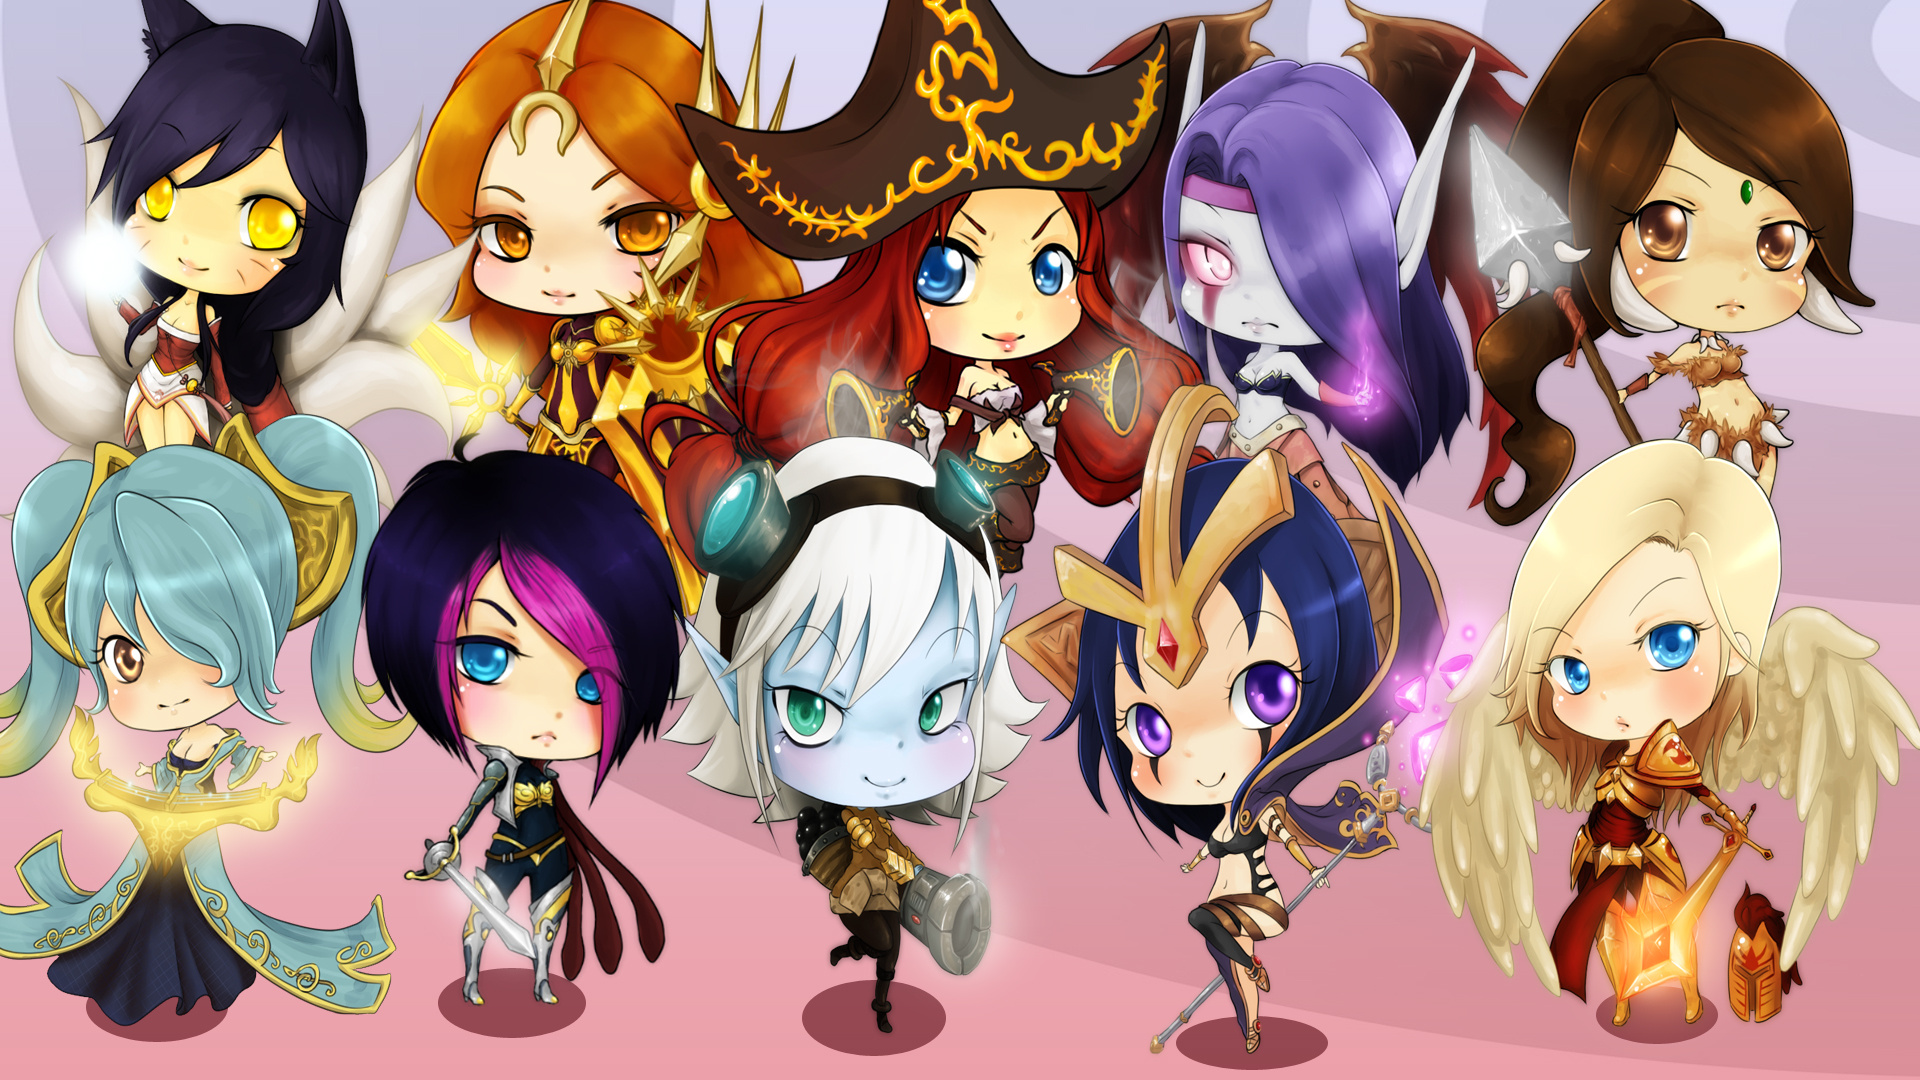 League of Legends, Chibi, Cute champions, Collective wallpapers, 1920x1080 Full HD Desktop